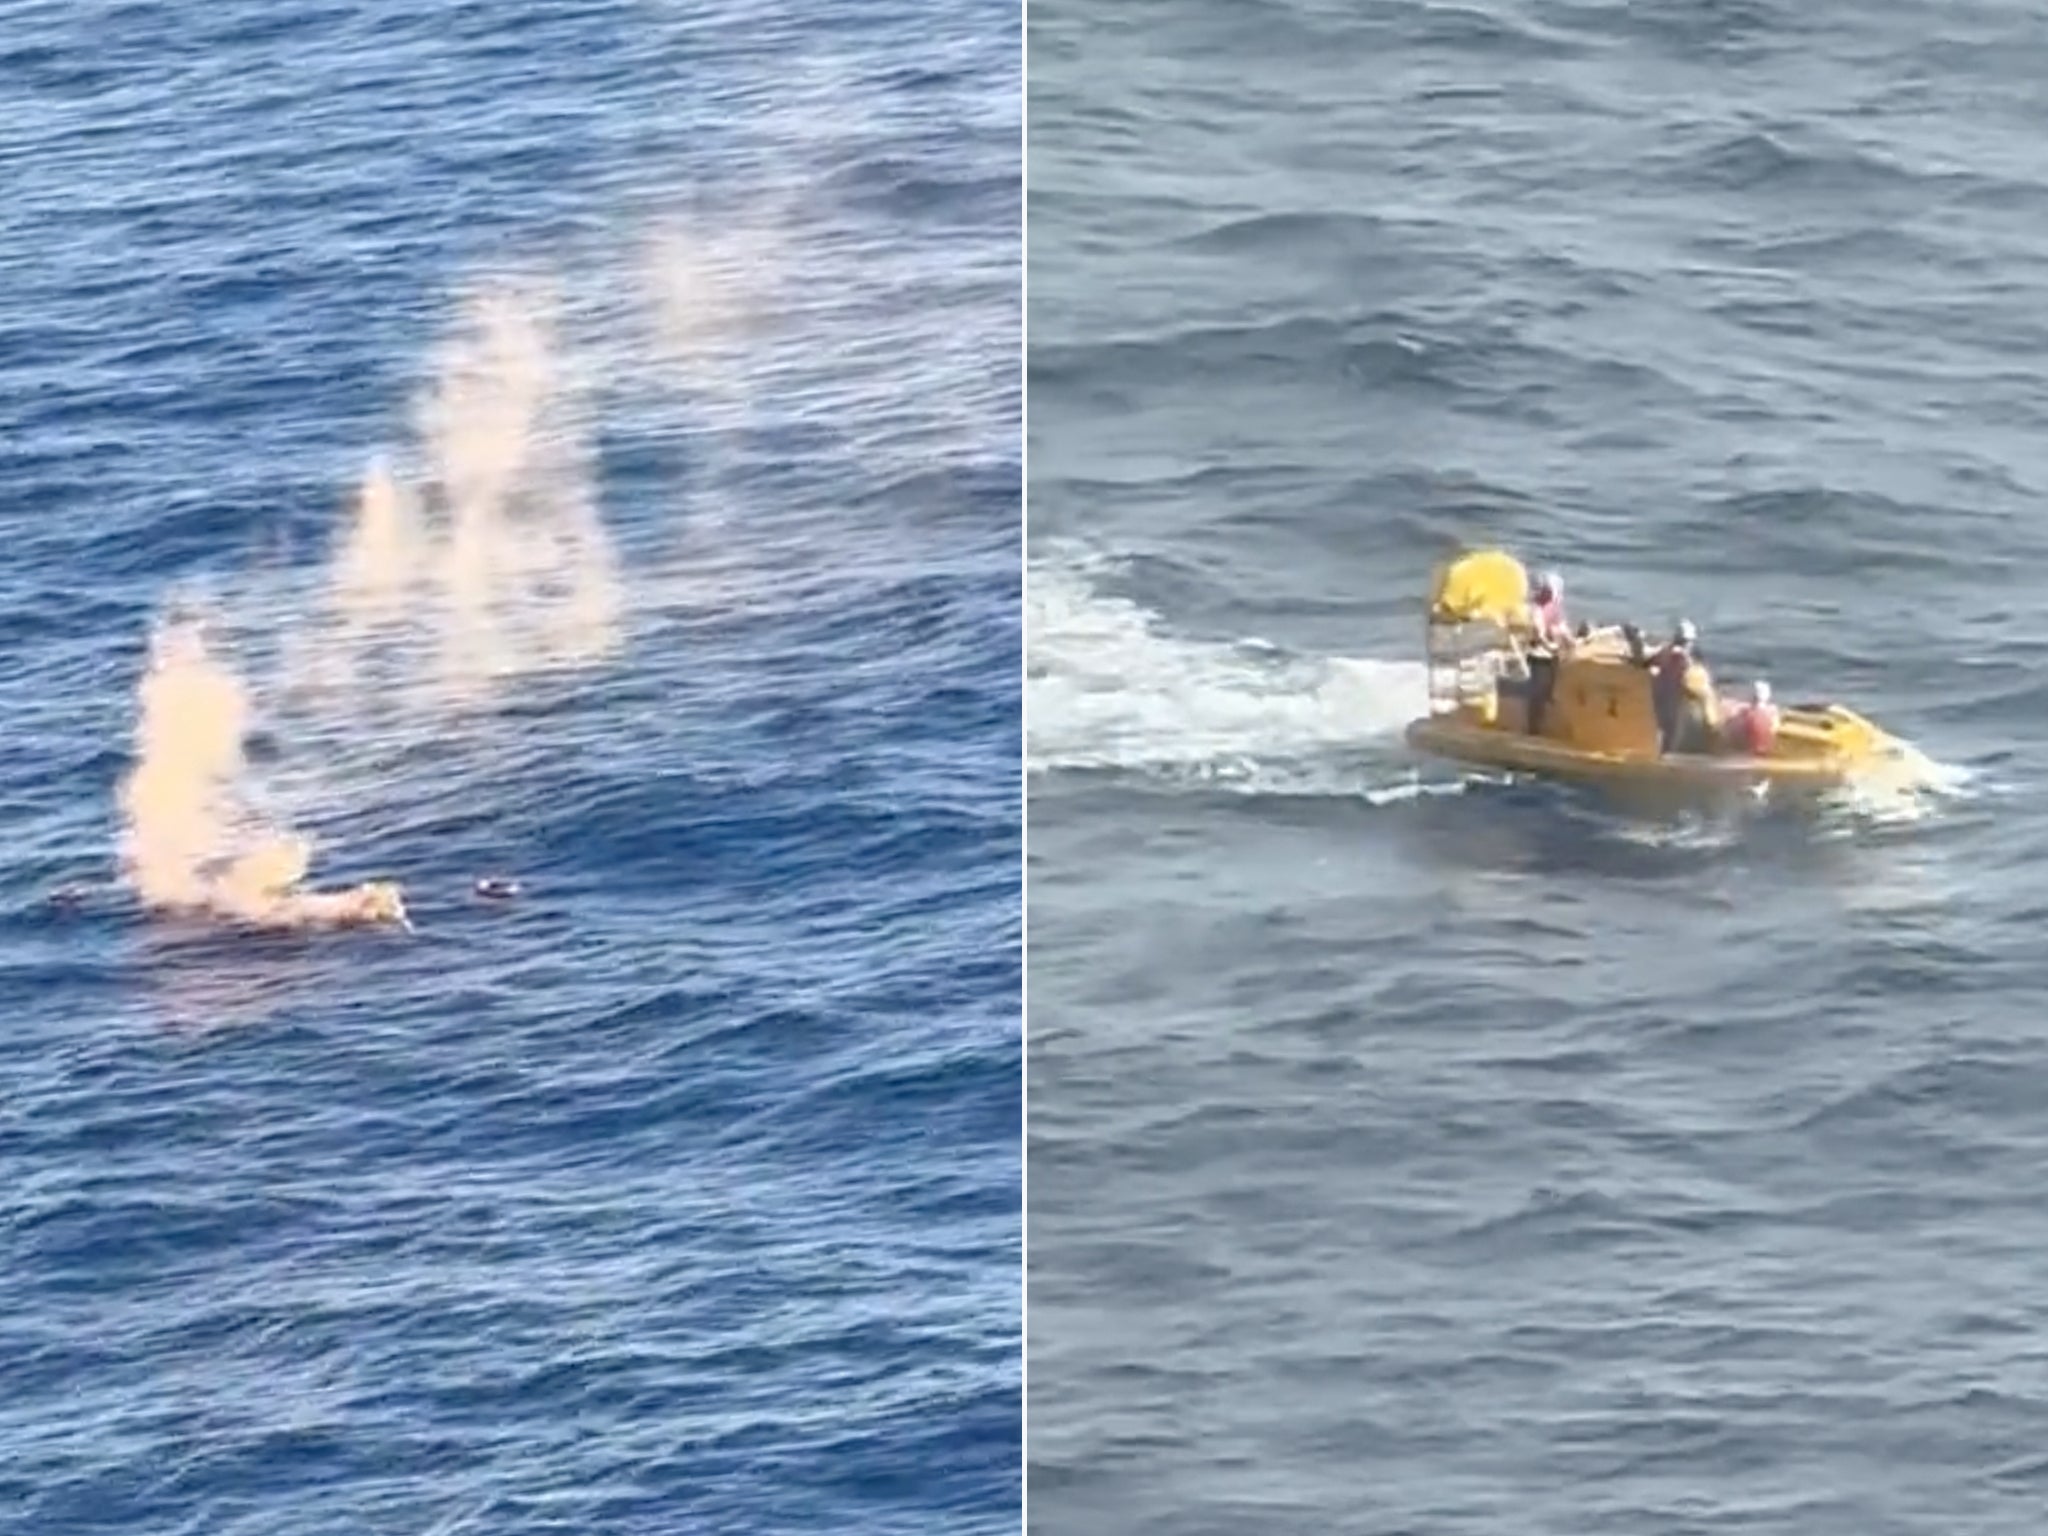 The rescued passenger is said to be ‘in good health’